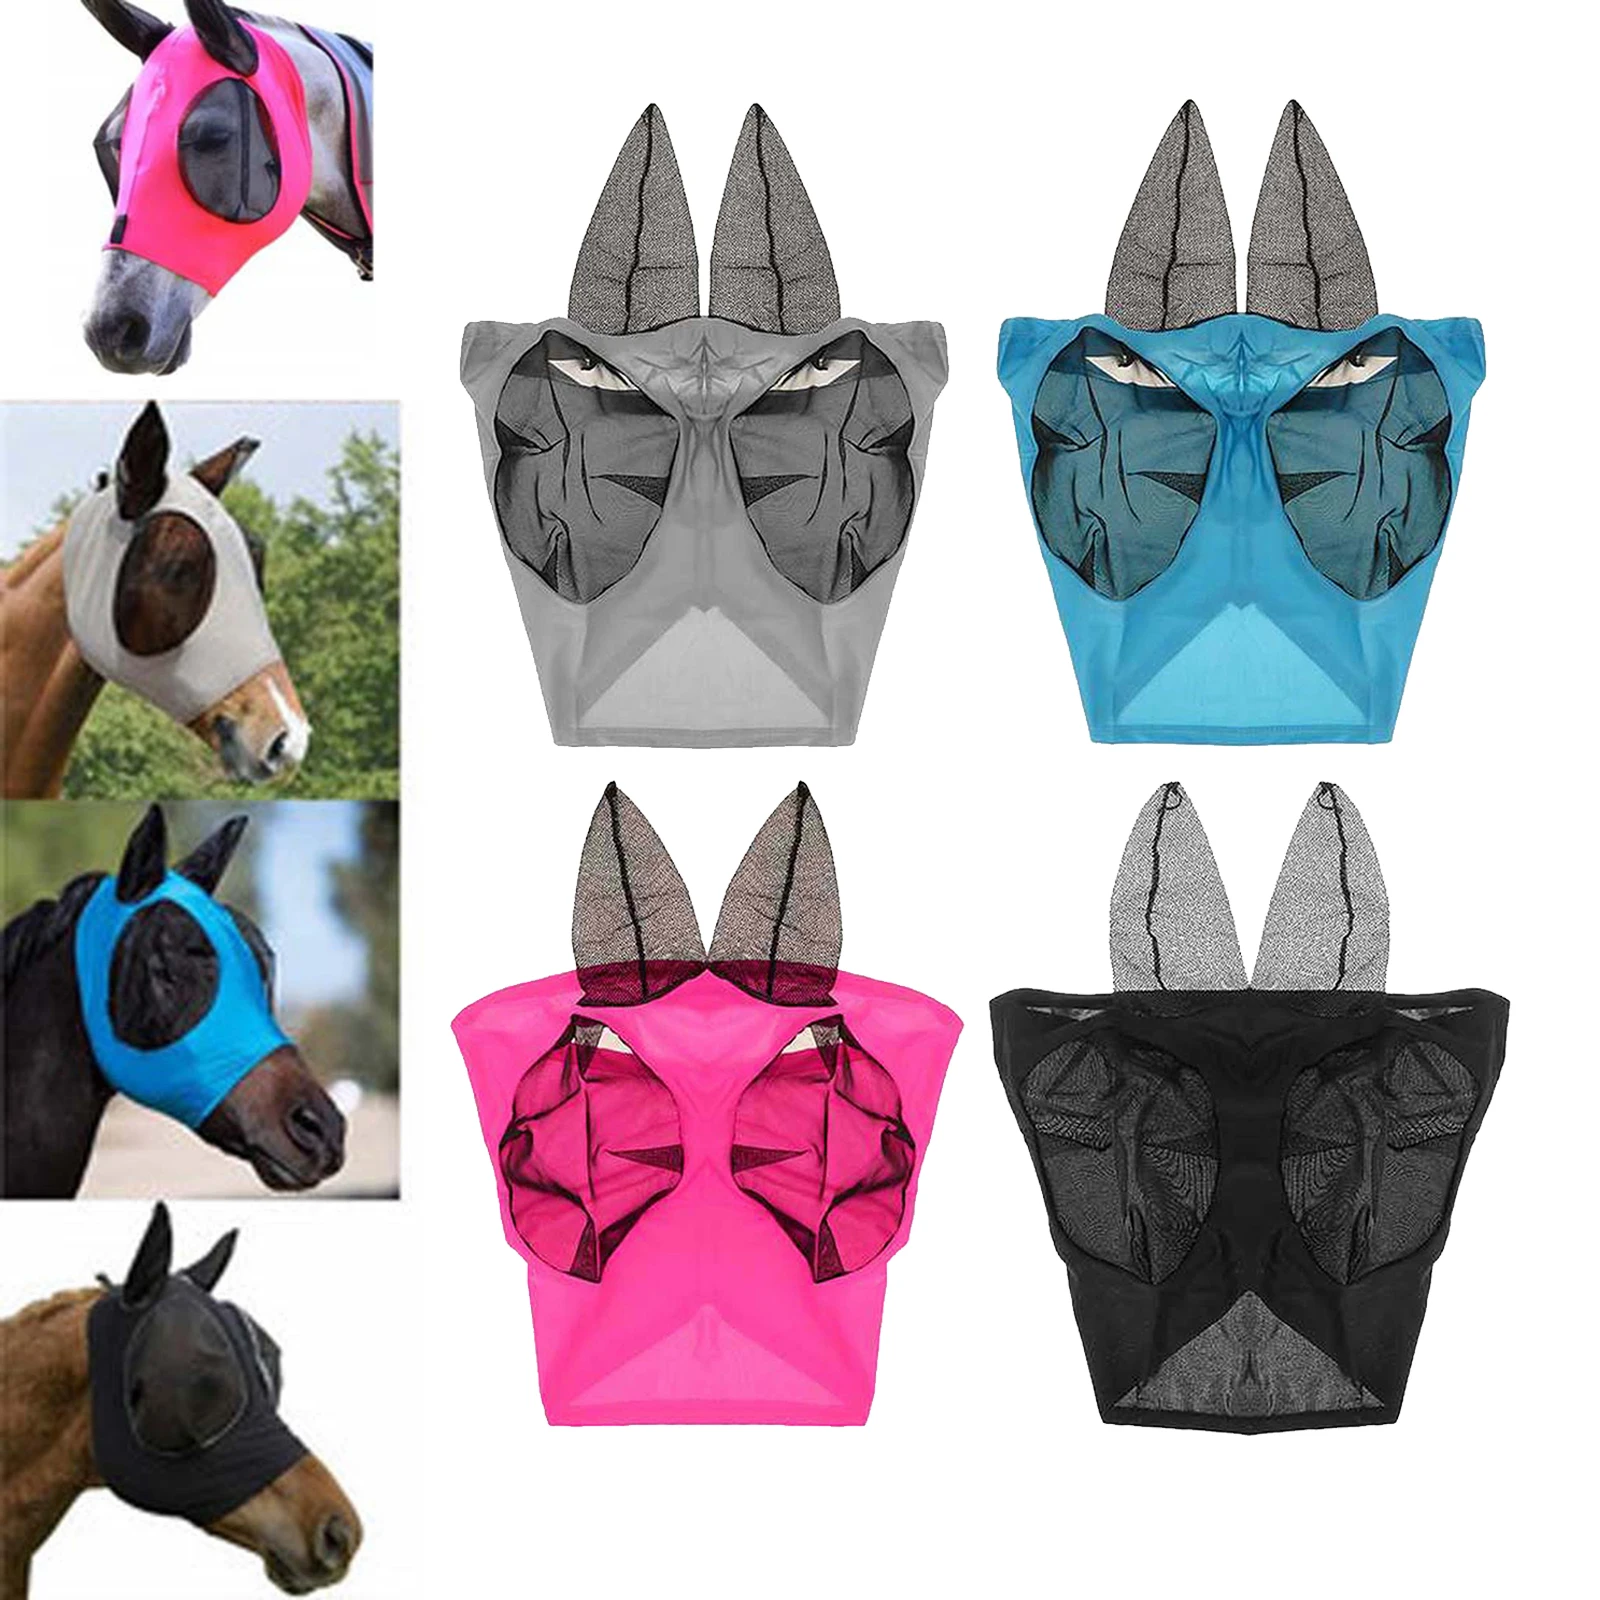 Anti-Mosquito Mesh Equine Horse Fly Mask Horse Head Cover Comfortable Anti Fly Files Mask For Horse Pony Cob Arab Protects